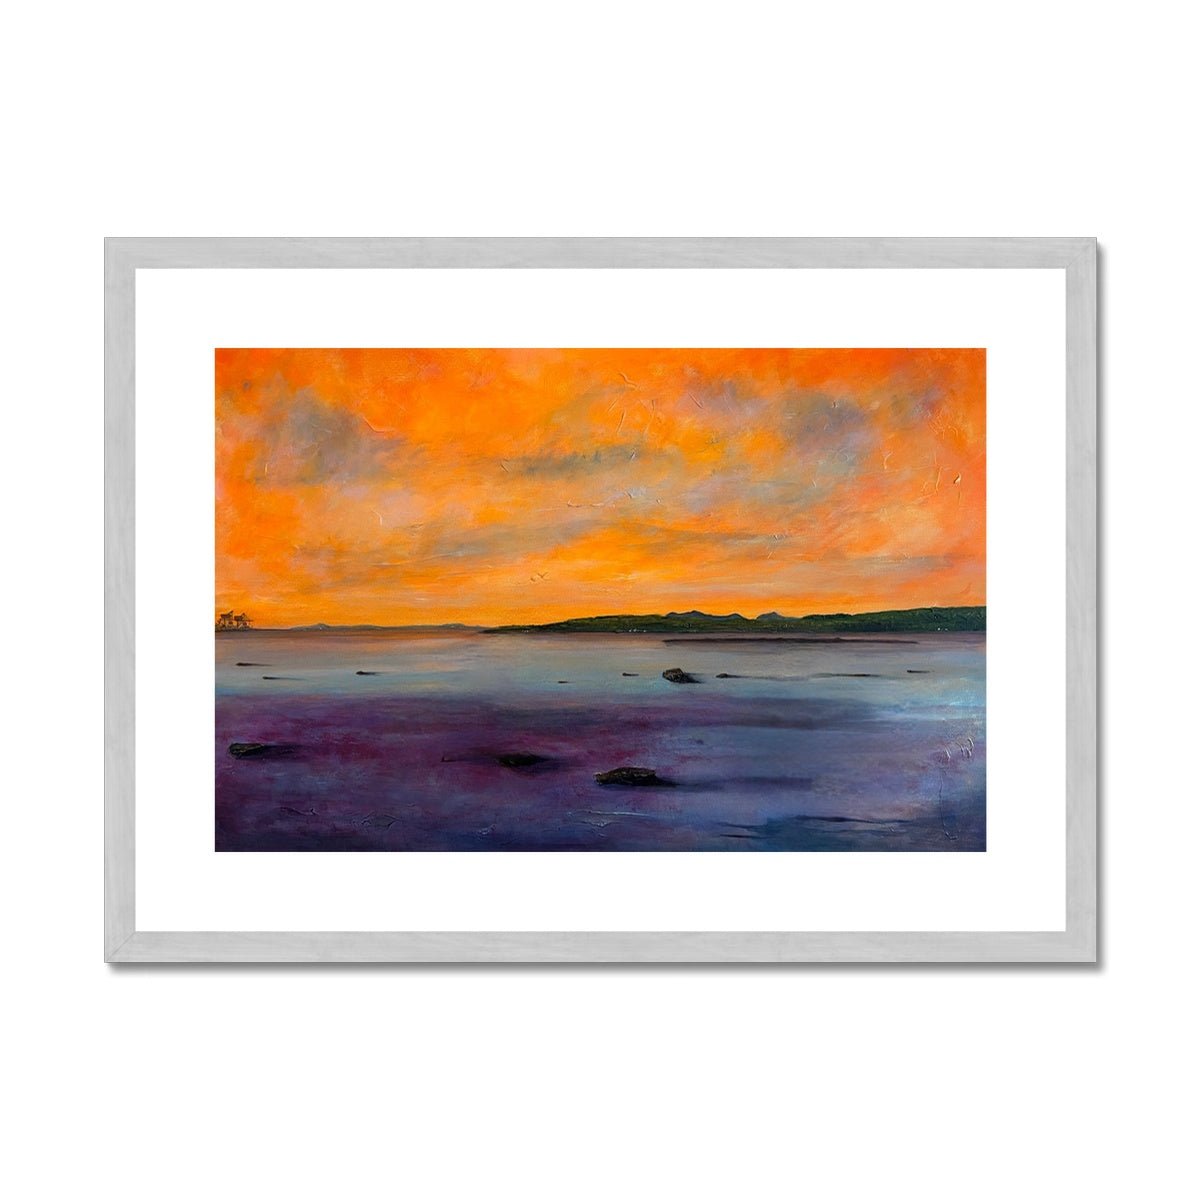 Looking From Largs Painting | Antique Framed & Mounted Prints From Scotland-Antique Framed & Mounted Prints-River Clyde Art Gallery-A2 Landscape-Silver Frame-Paintings, Prints, Homeware, Art Gifts From Scotland By Scottish Artist Kevin Hunter